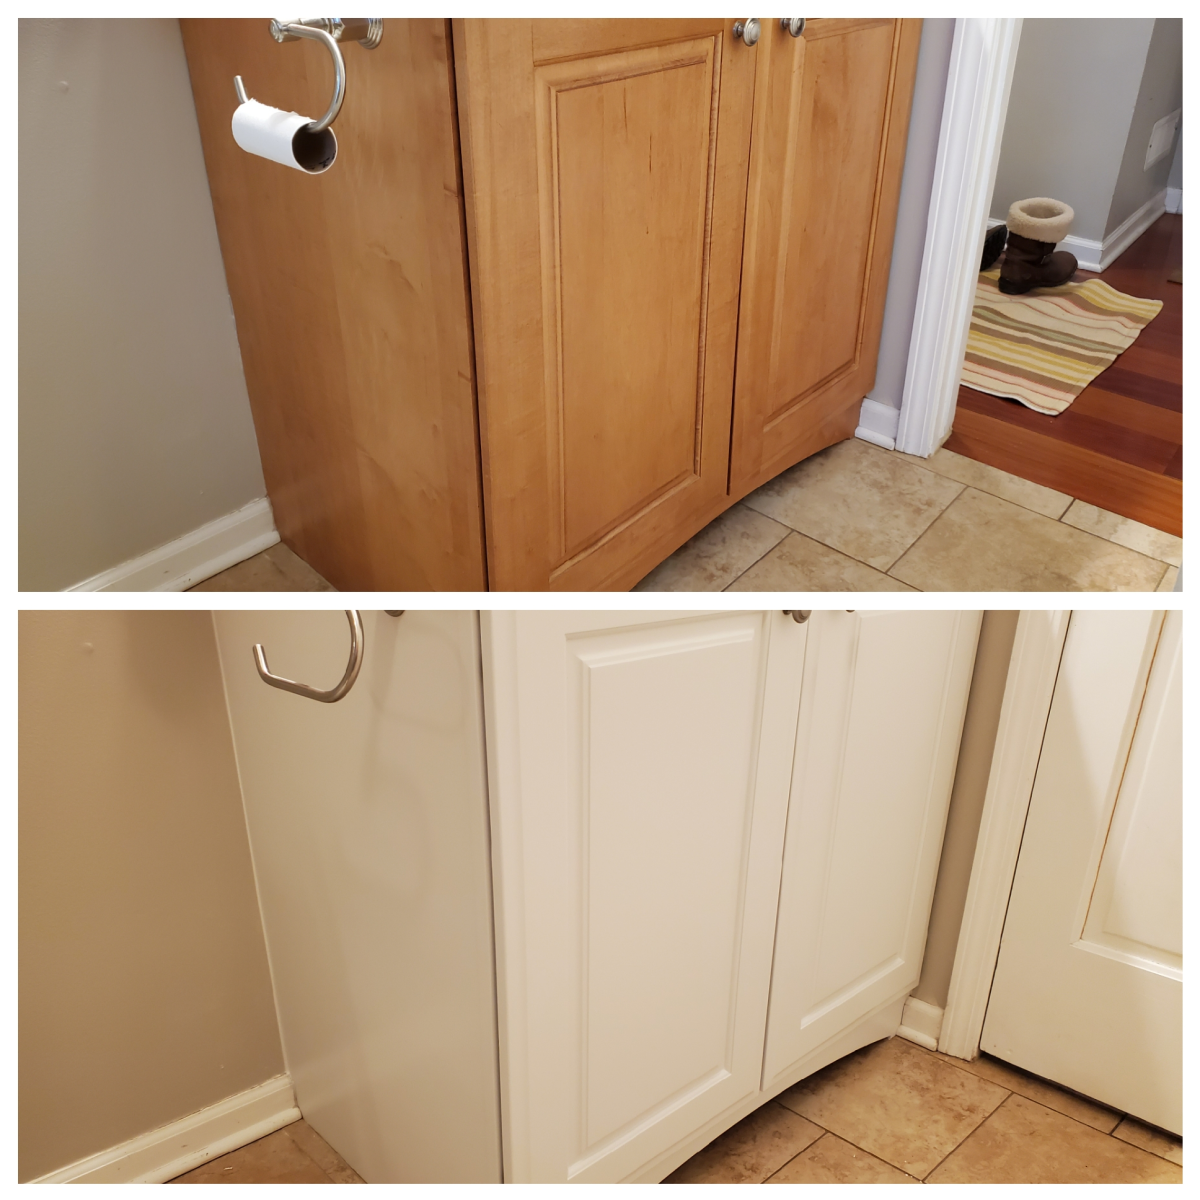 More before and after photos of the bathroom vanity.